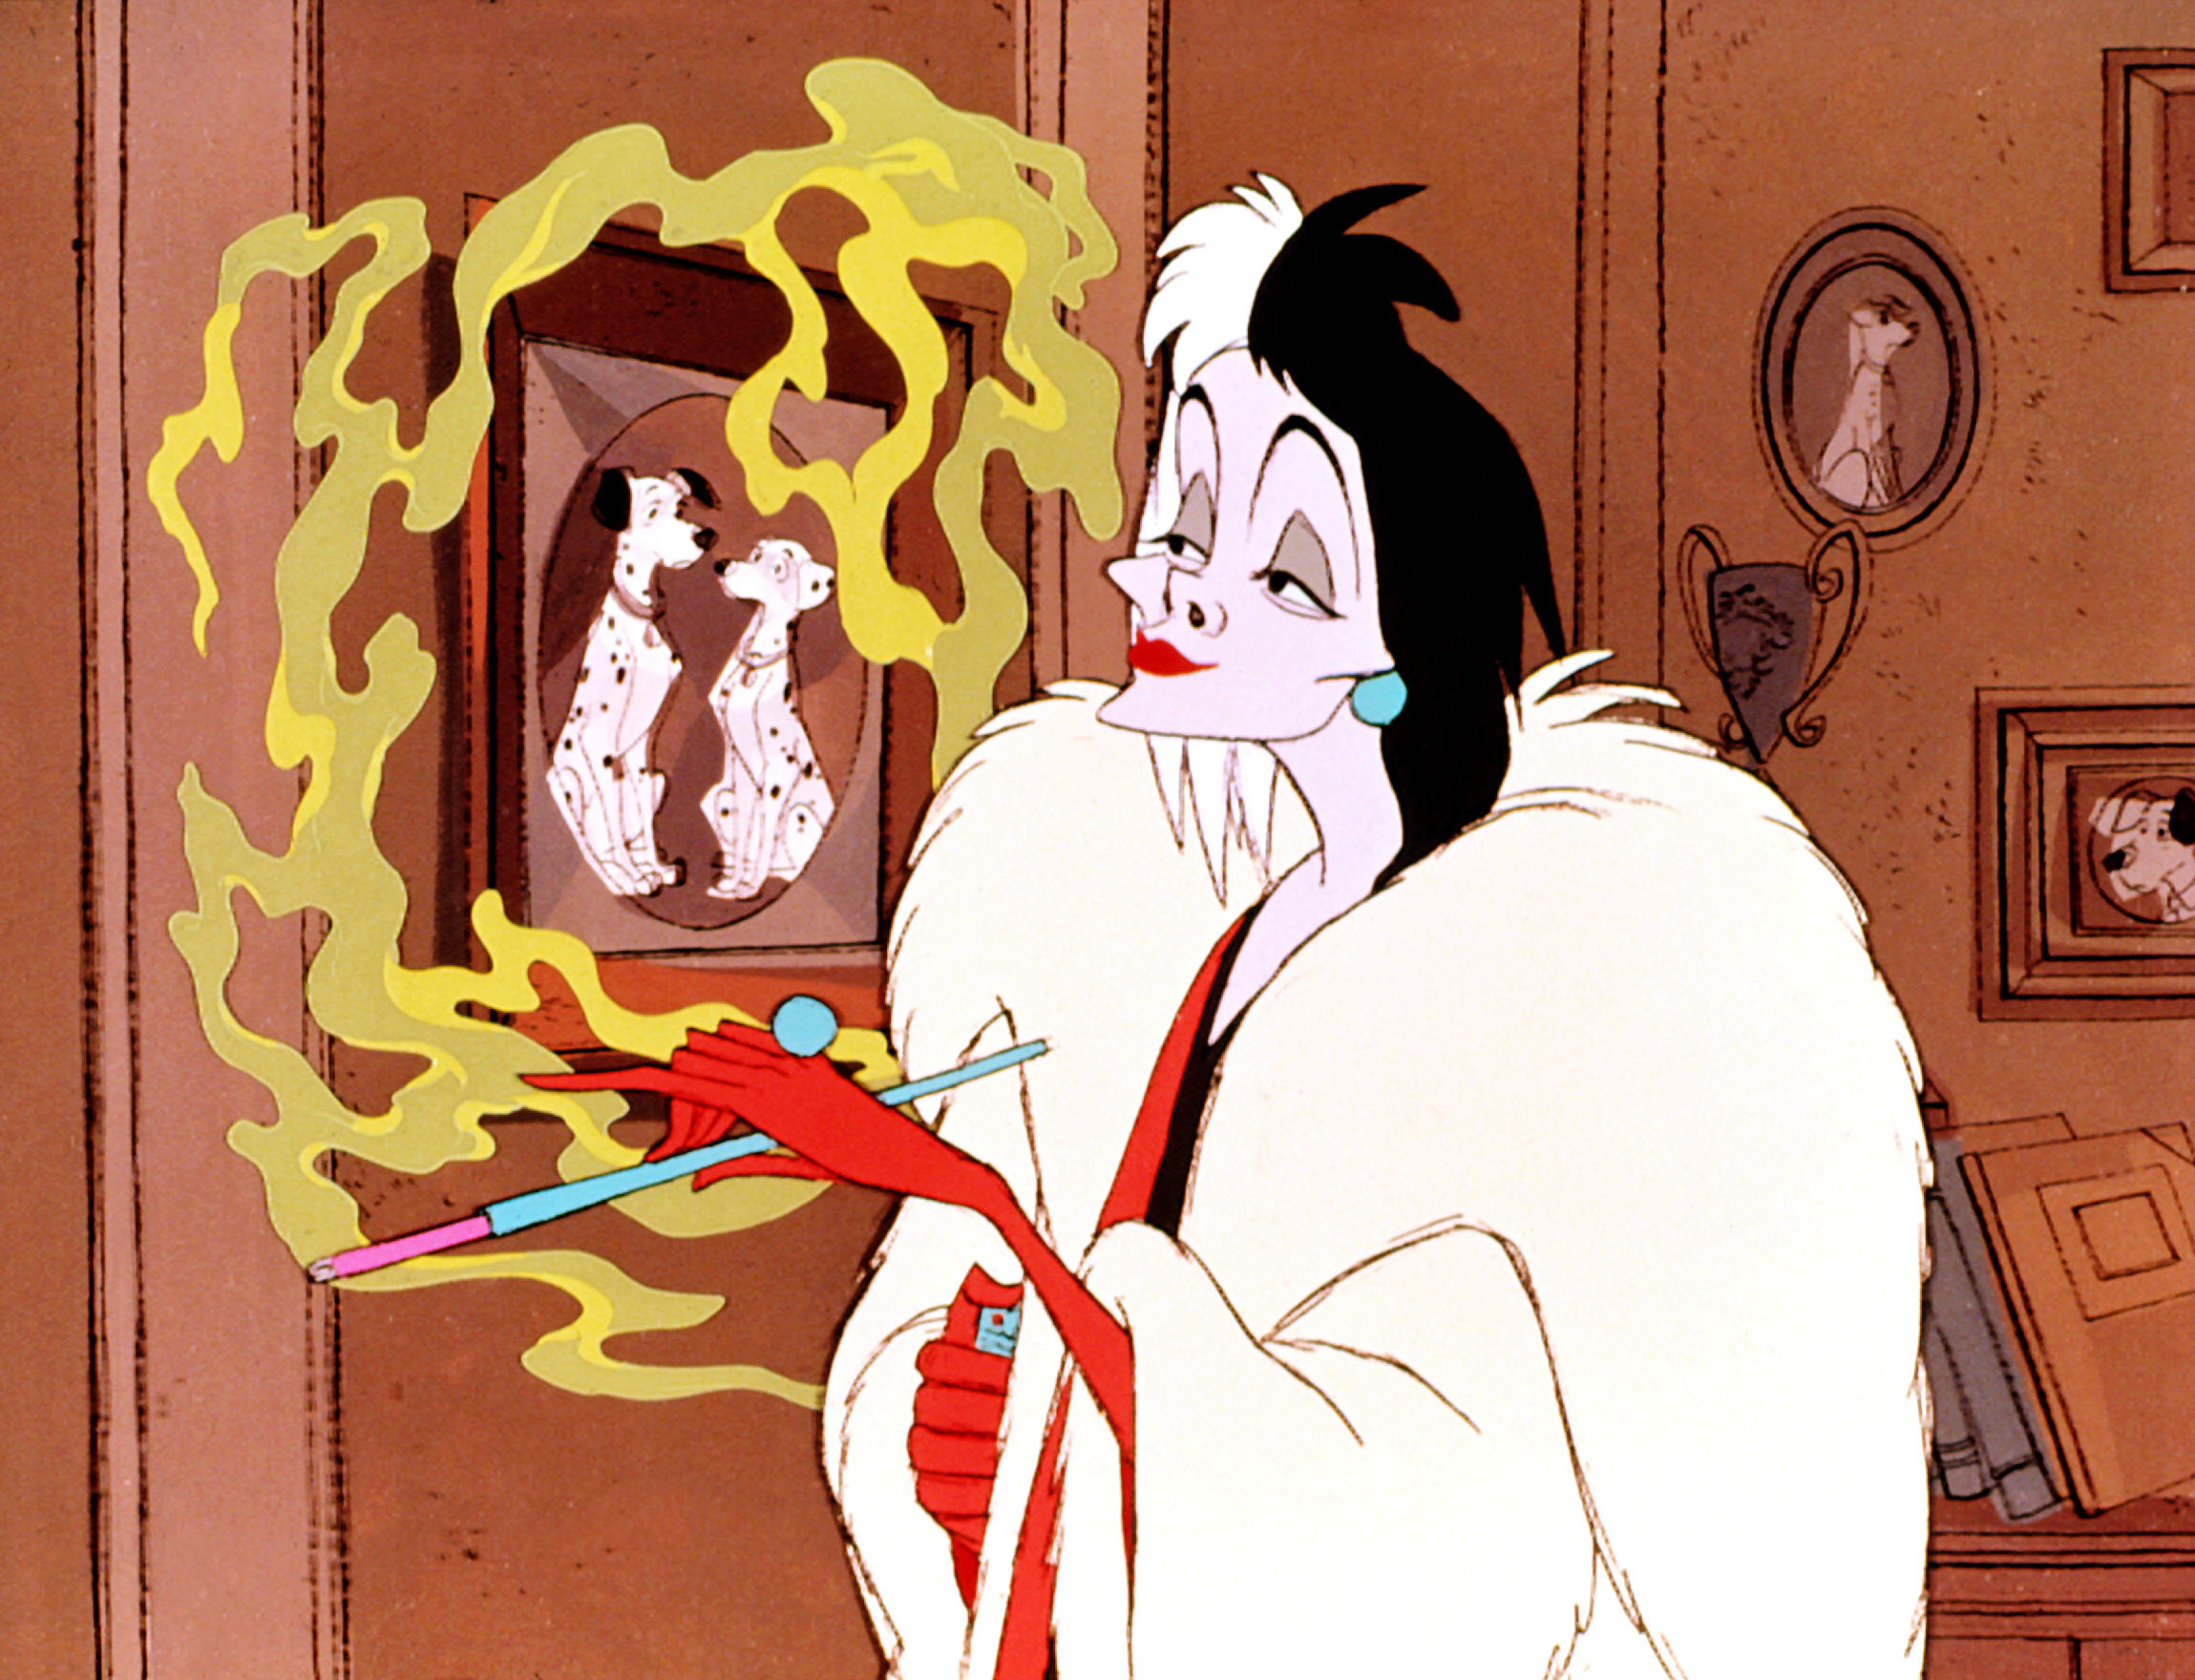 The animated Cruella with her smoking